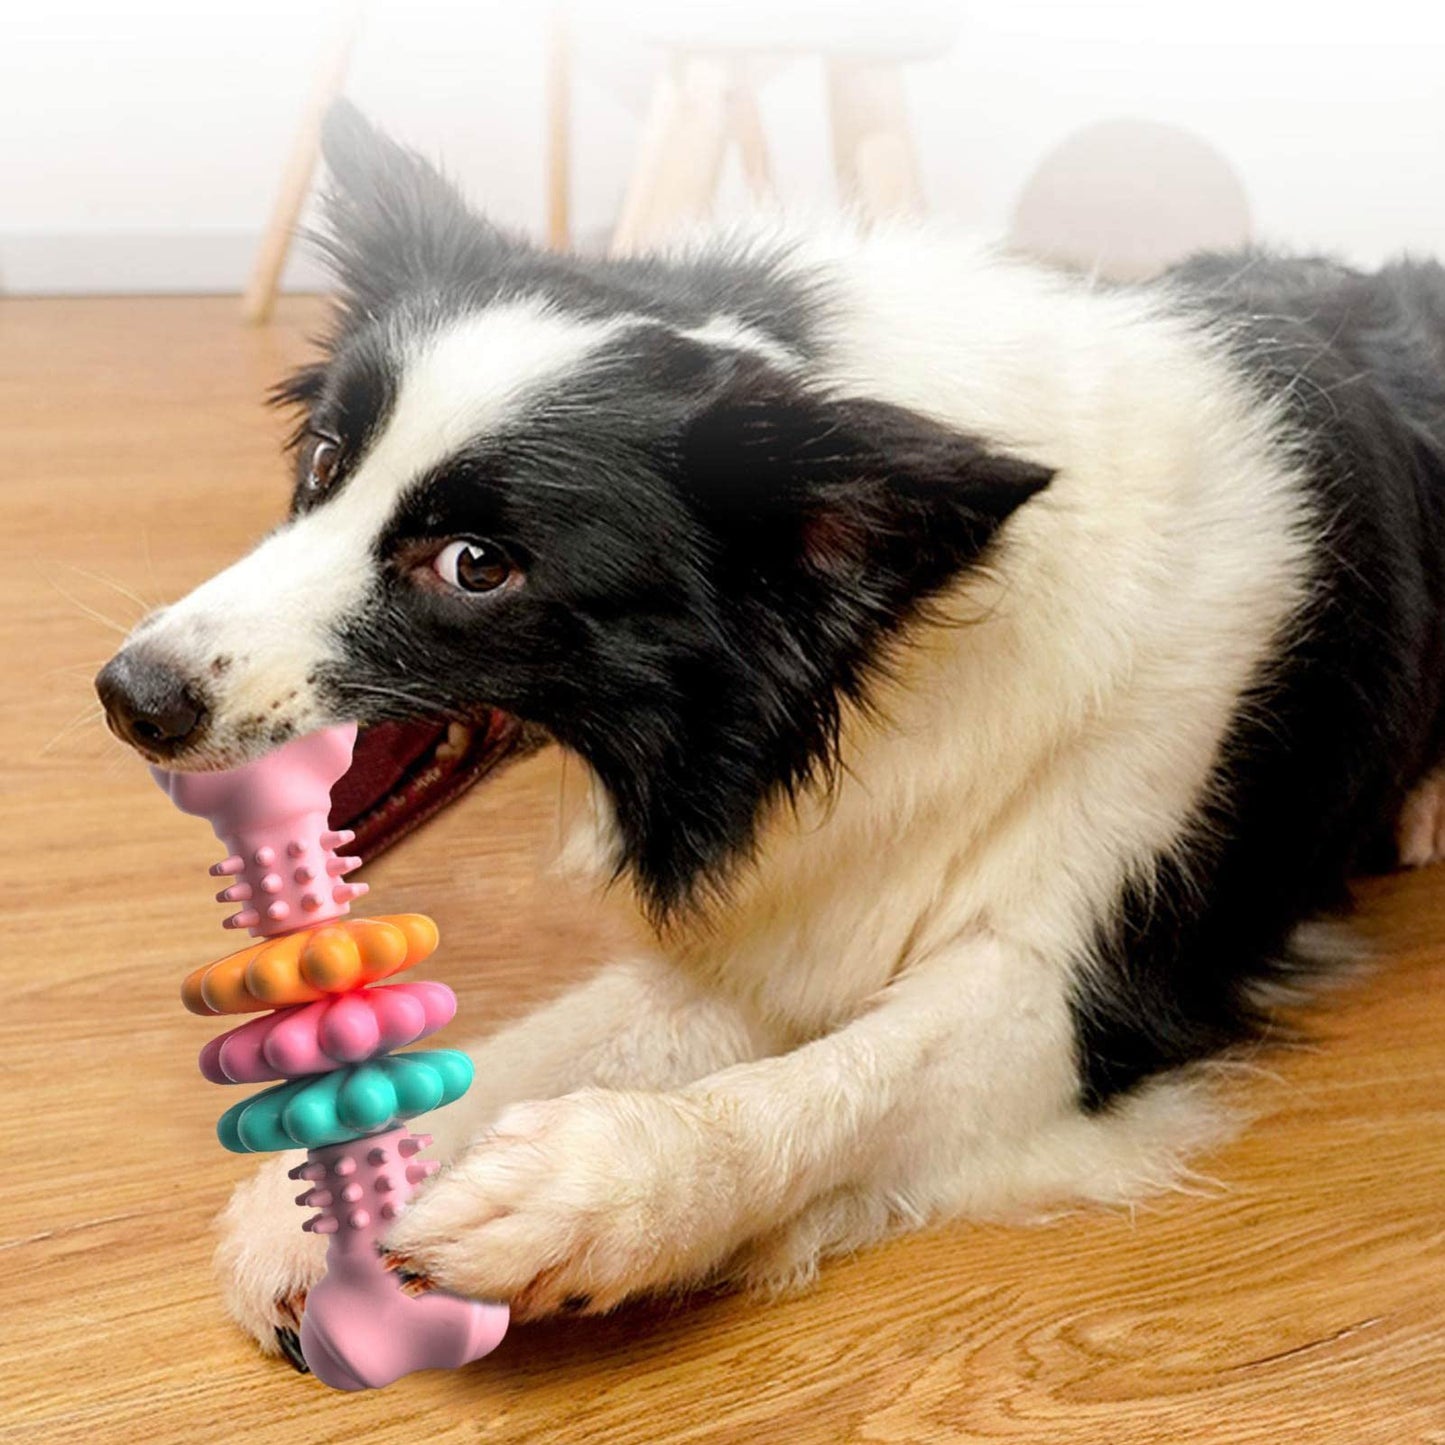 Dog Chew Toy Dog Bone Type  Dogs Teeth Cleaning Toys Indestructible